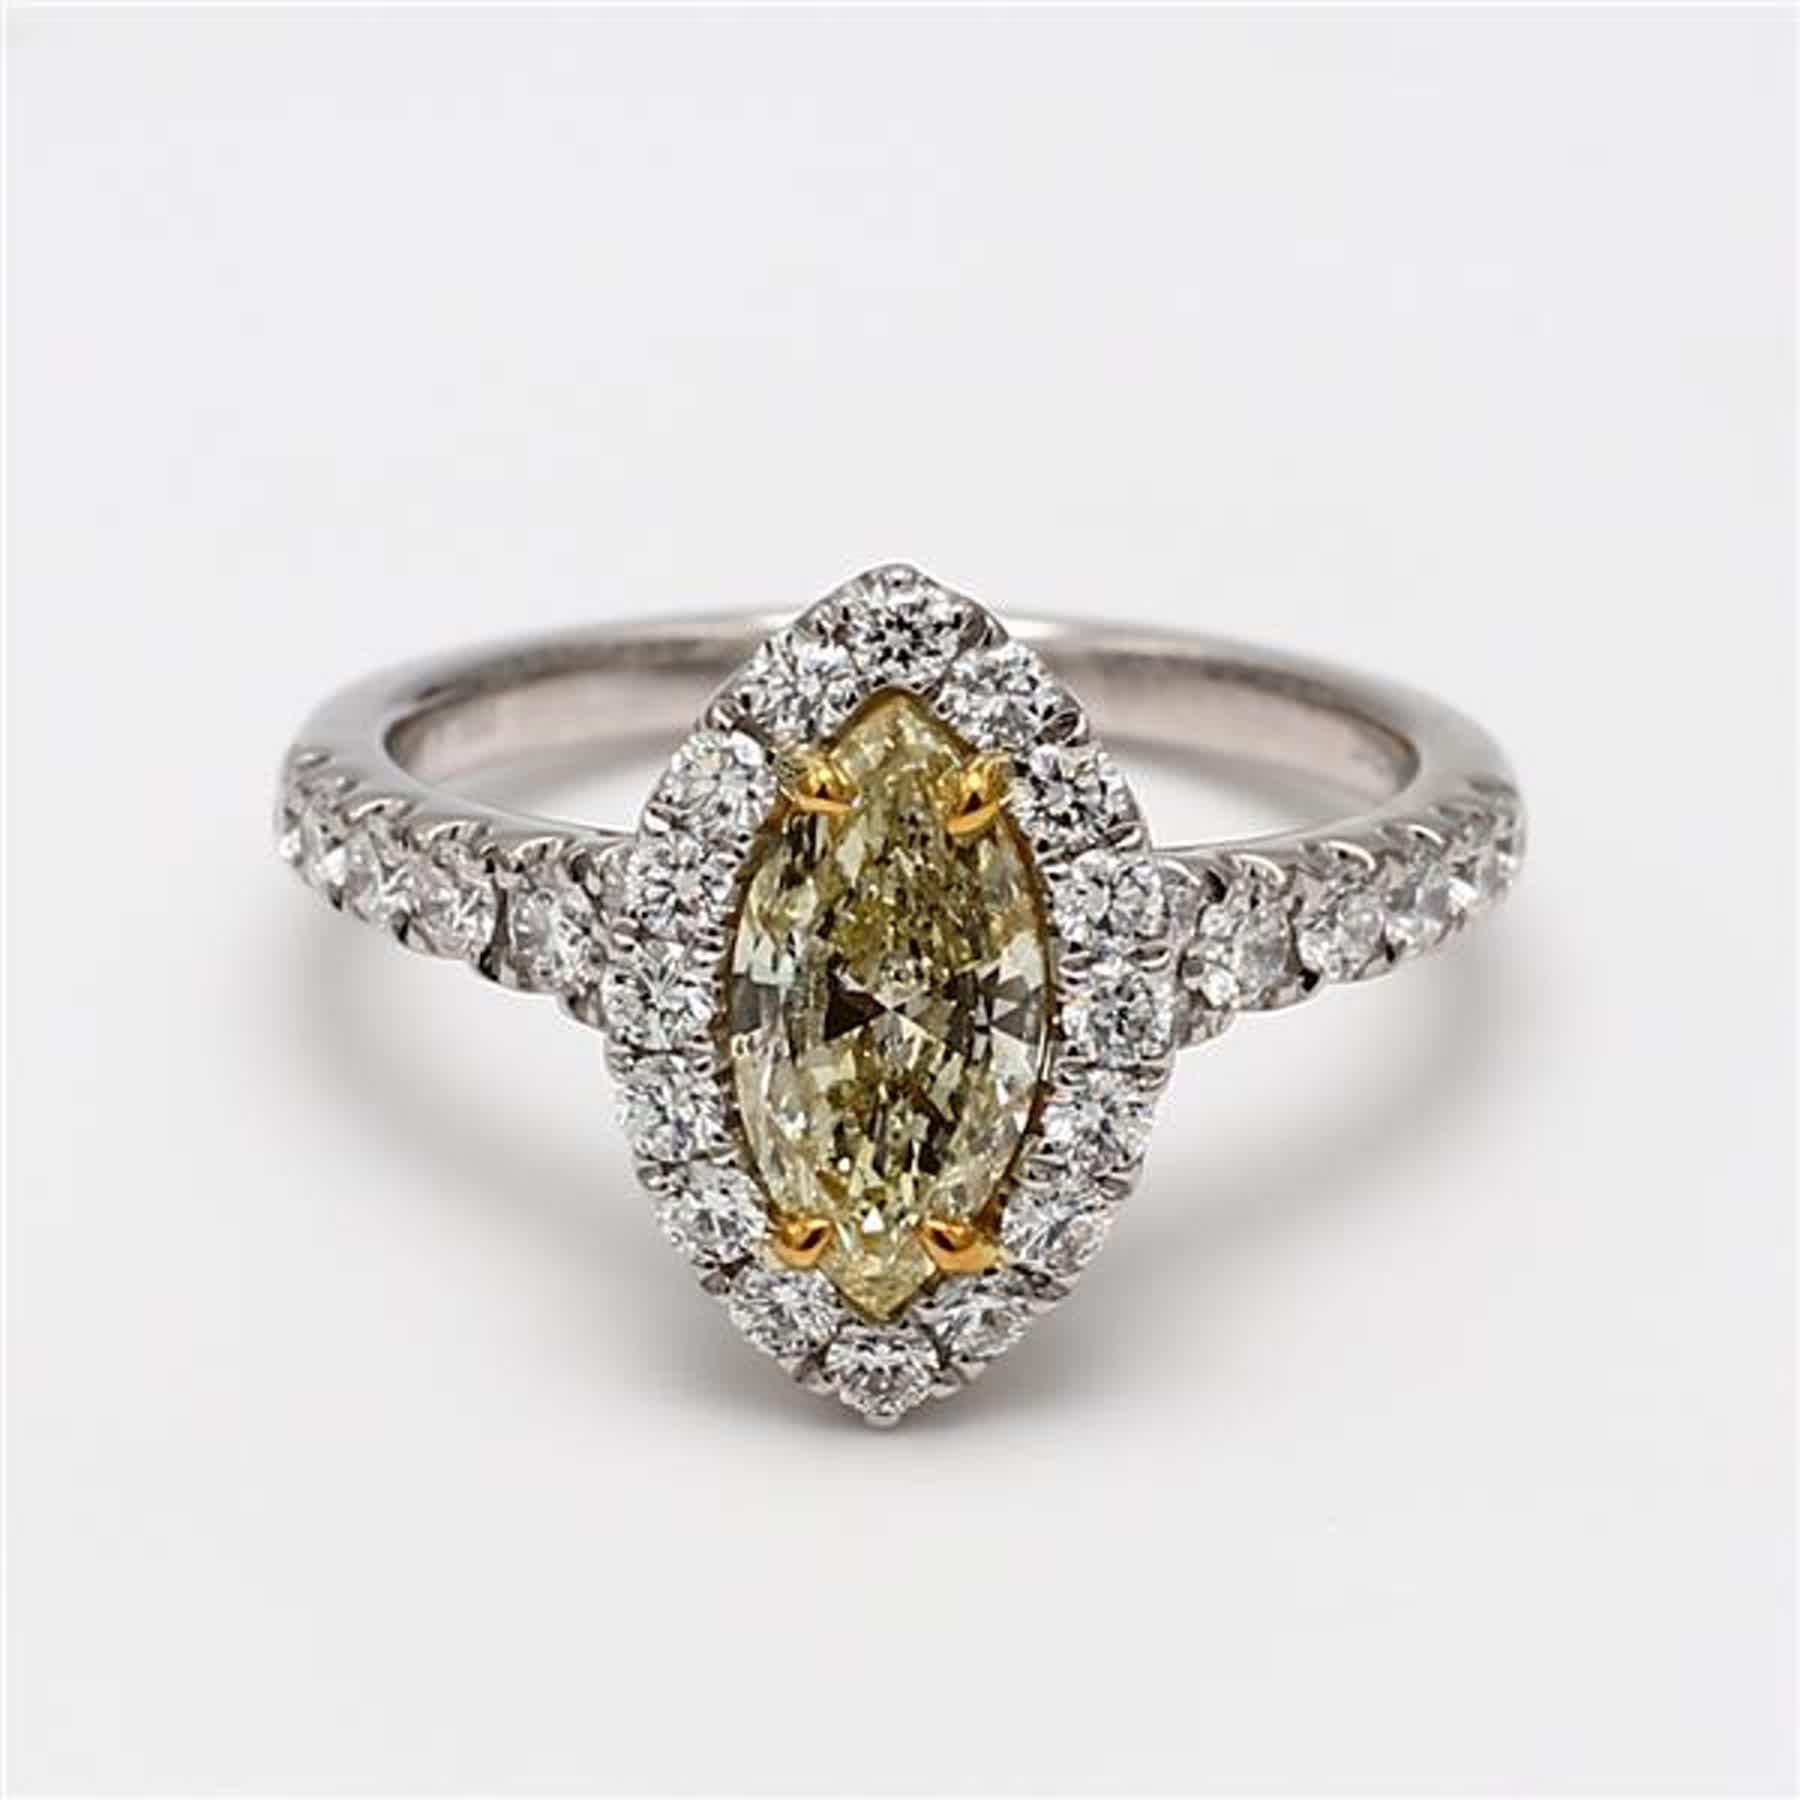 RareGemWorld's classic GIA certified diamond ring. Mounted in a beautiful 18K Yellow and White Gold and Platinum setting with a natural marquise cut yellow diamond. The yellow diamond is surrounded by round natural white diamond melee. This ring is